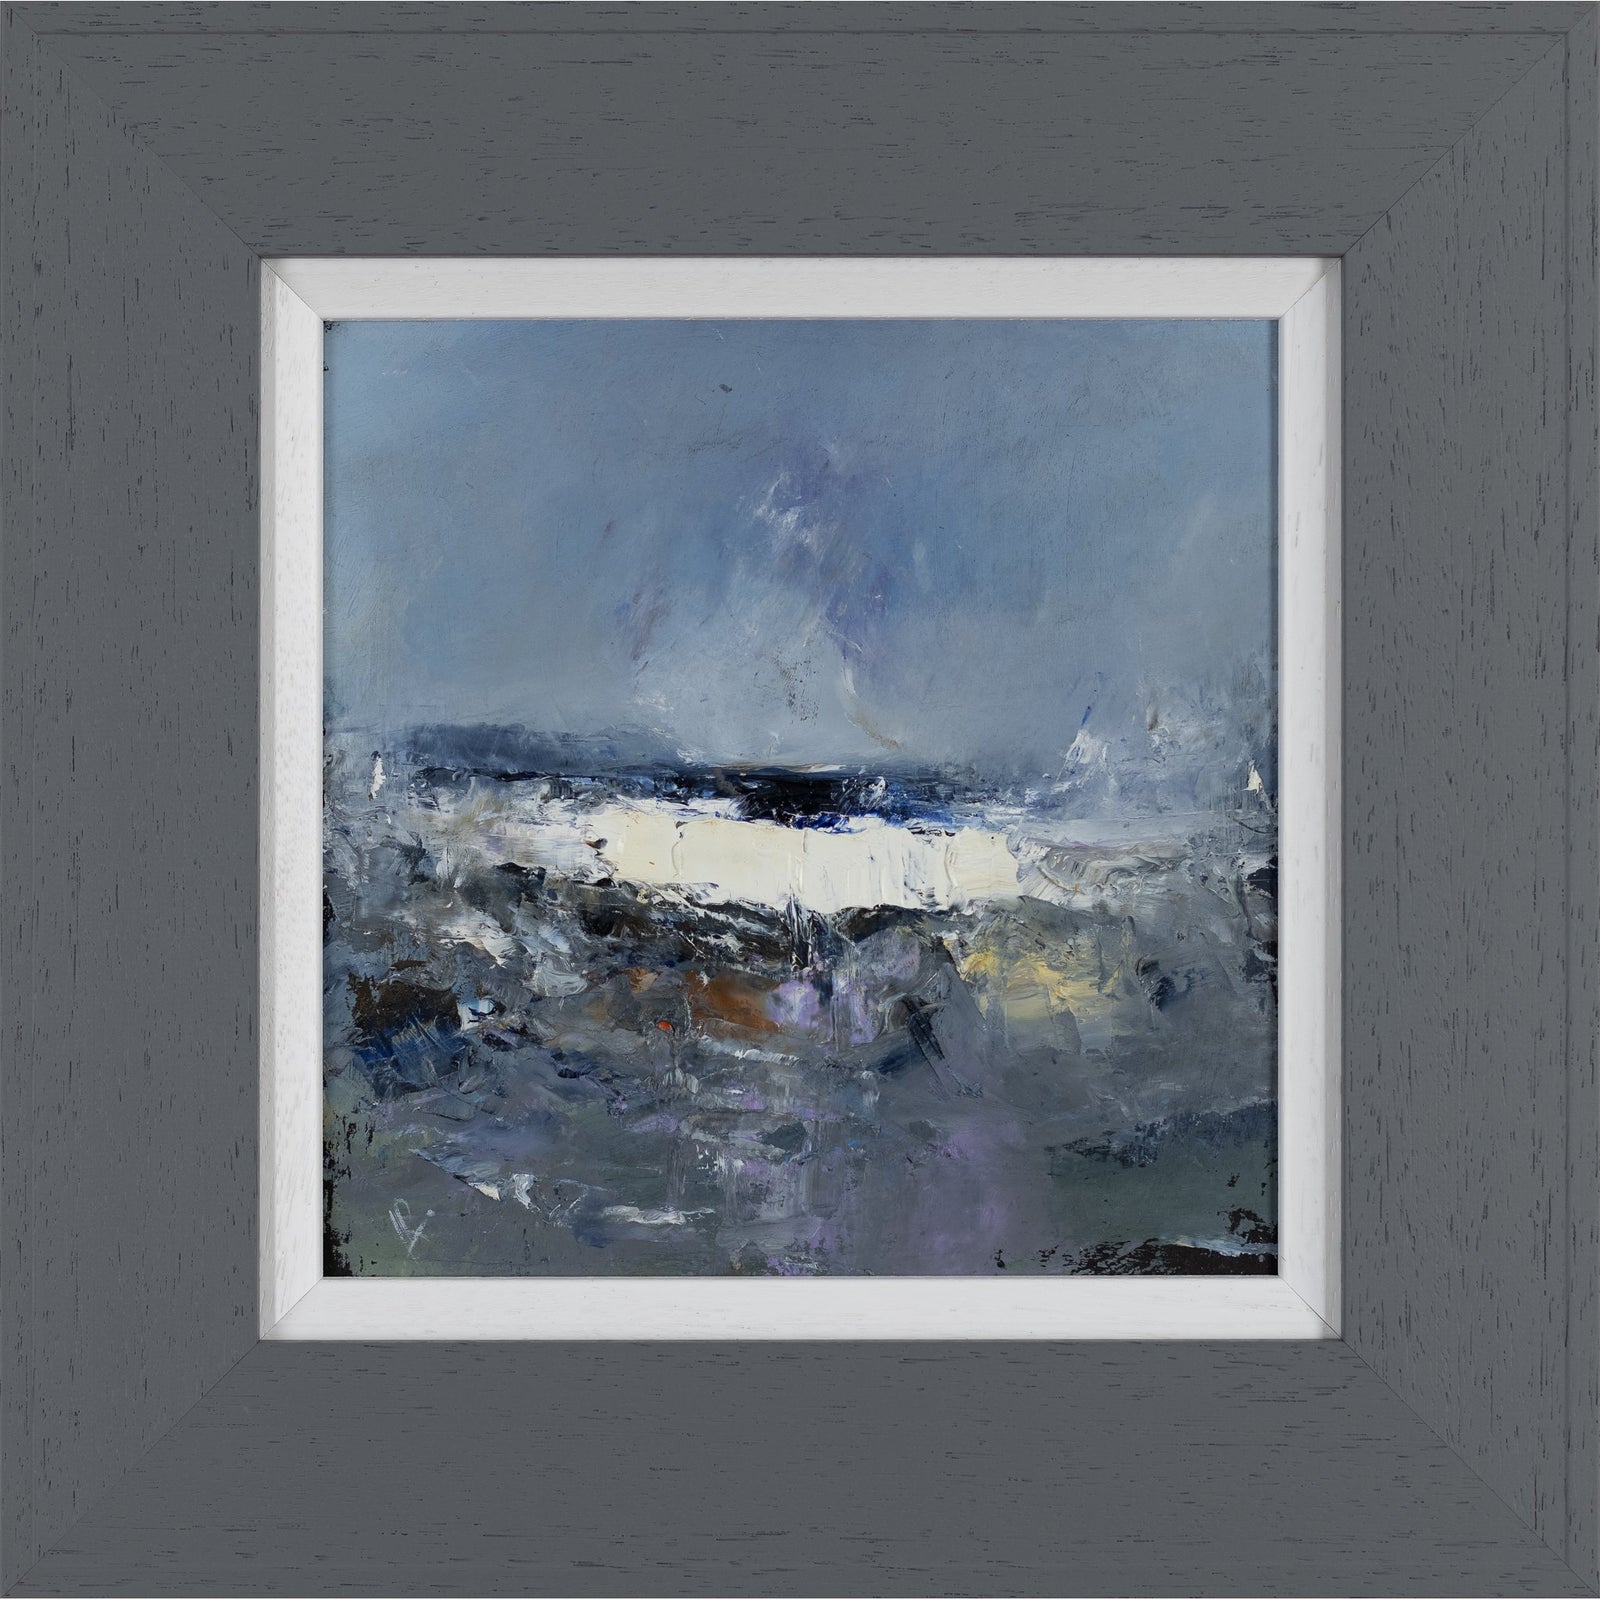 'Brewing Storm' oil on board original by Ian Rawnsley, available at Padstow Gallery, Cornwall